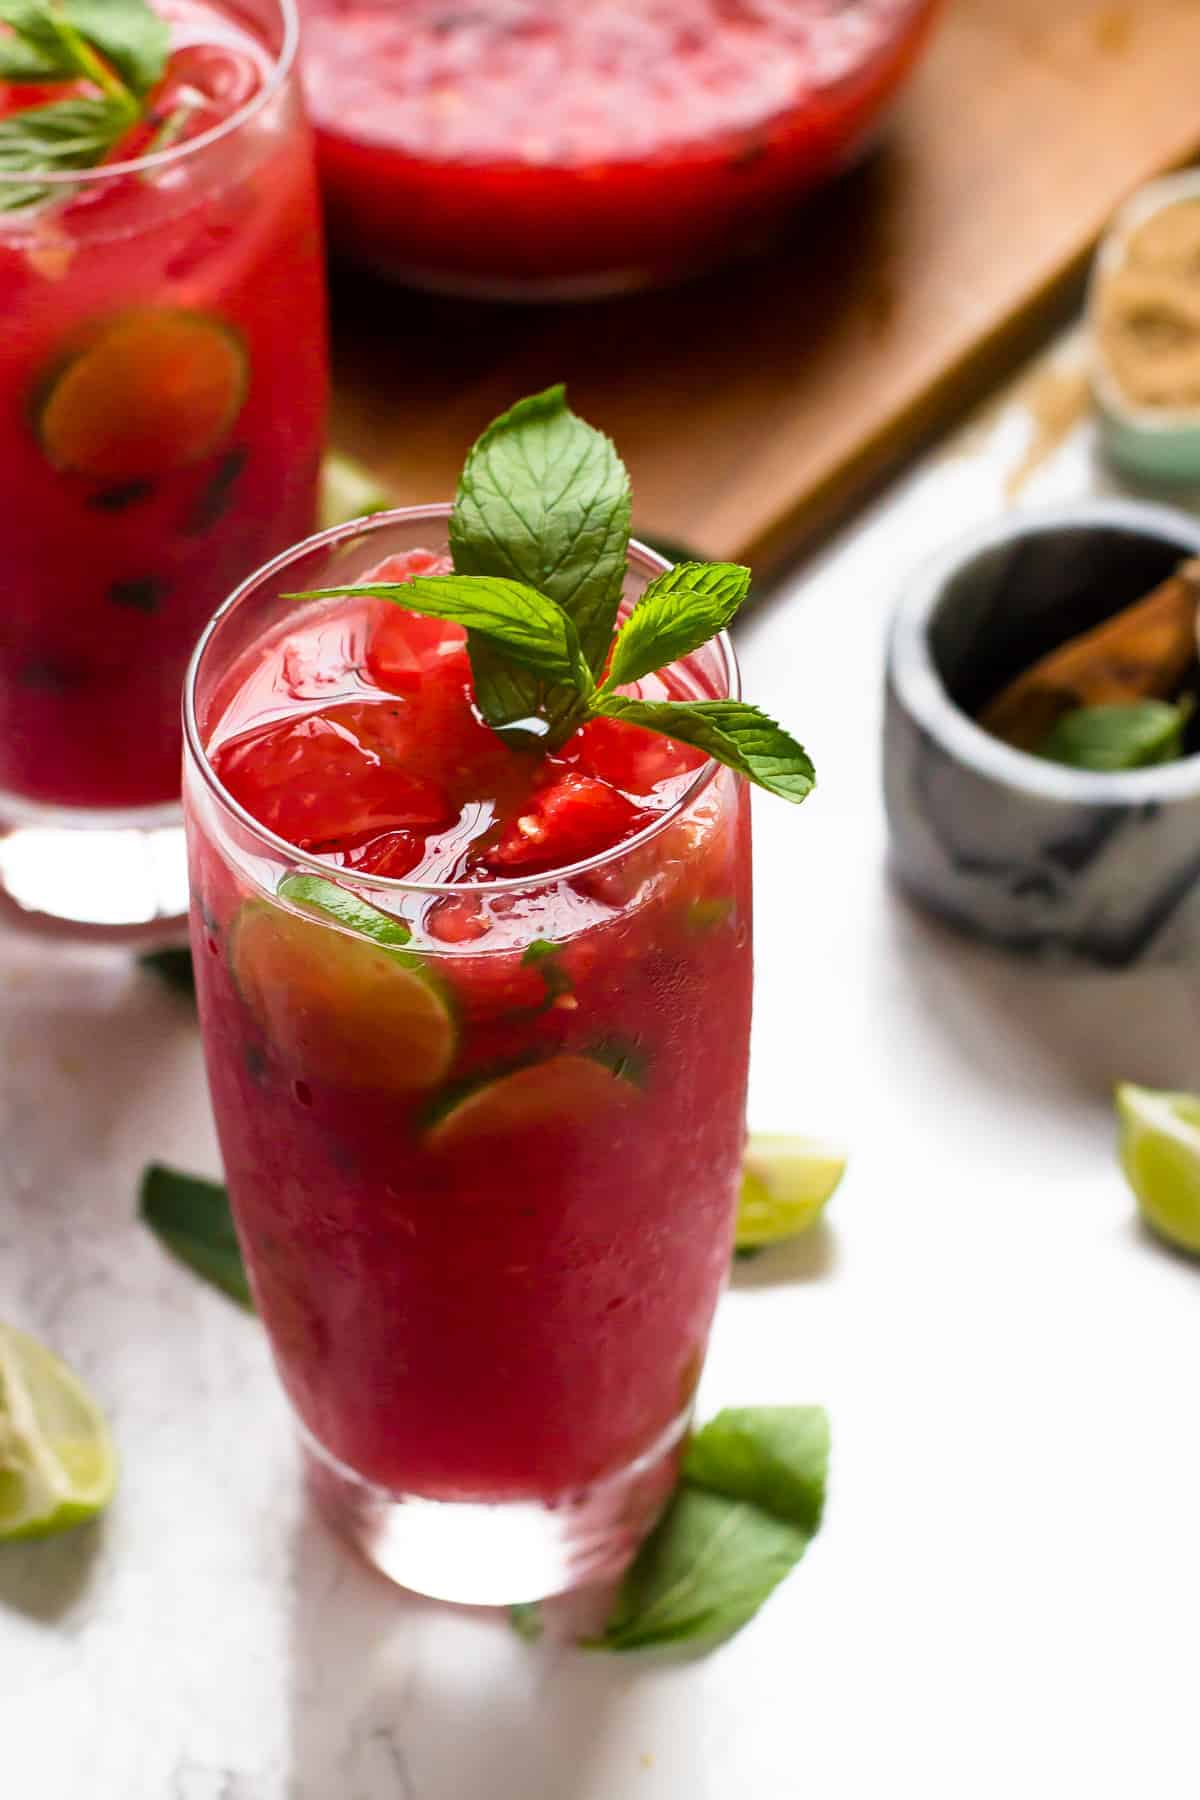 These Watermelon Mojitos are incredible easy to make, only 5 ingredients and are a perfect refreshing, minty summer cocktail!